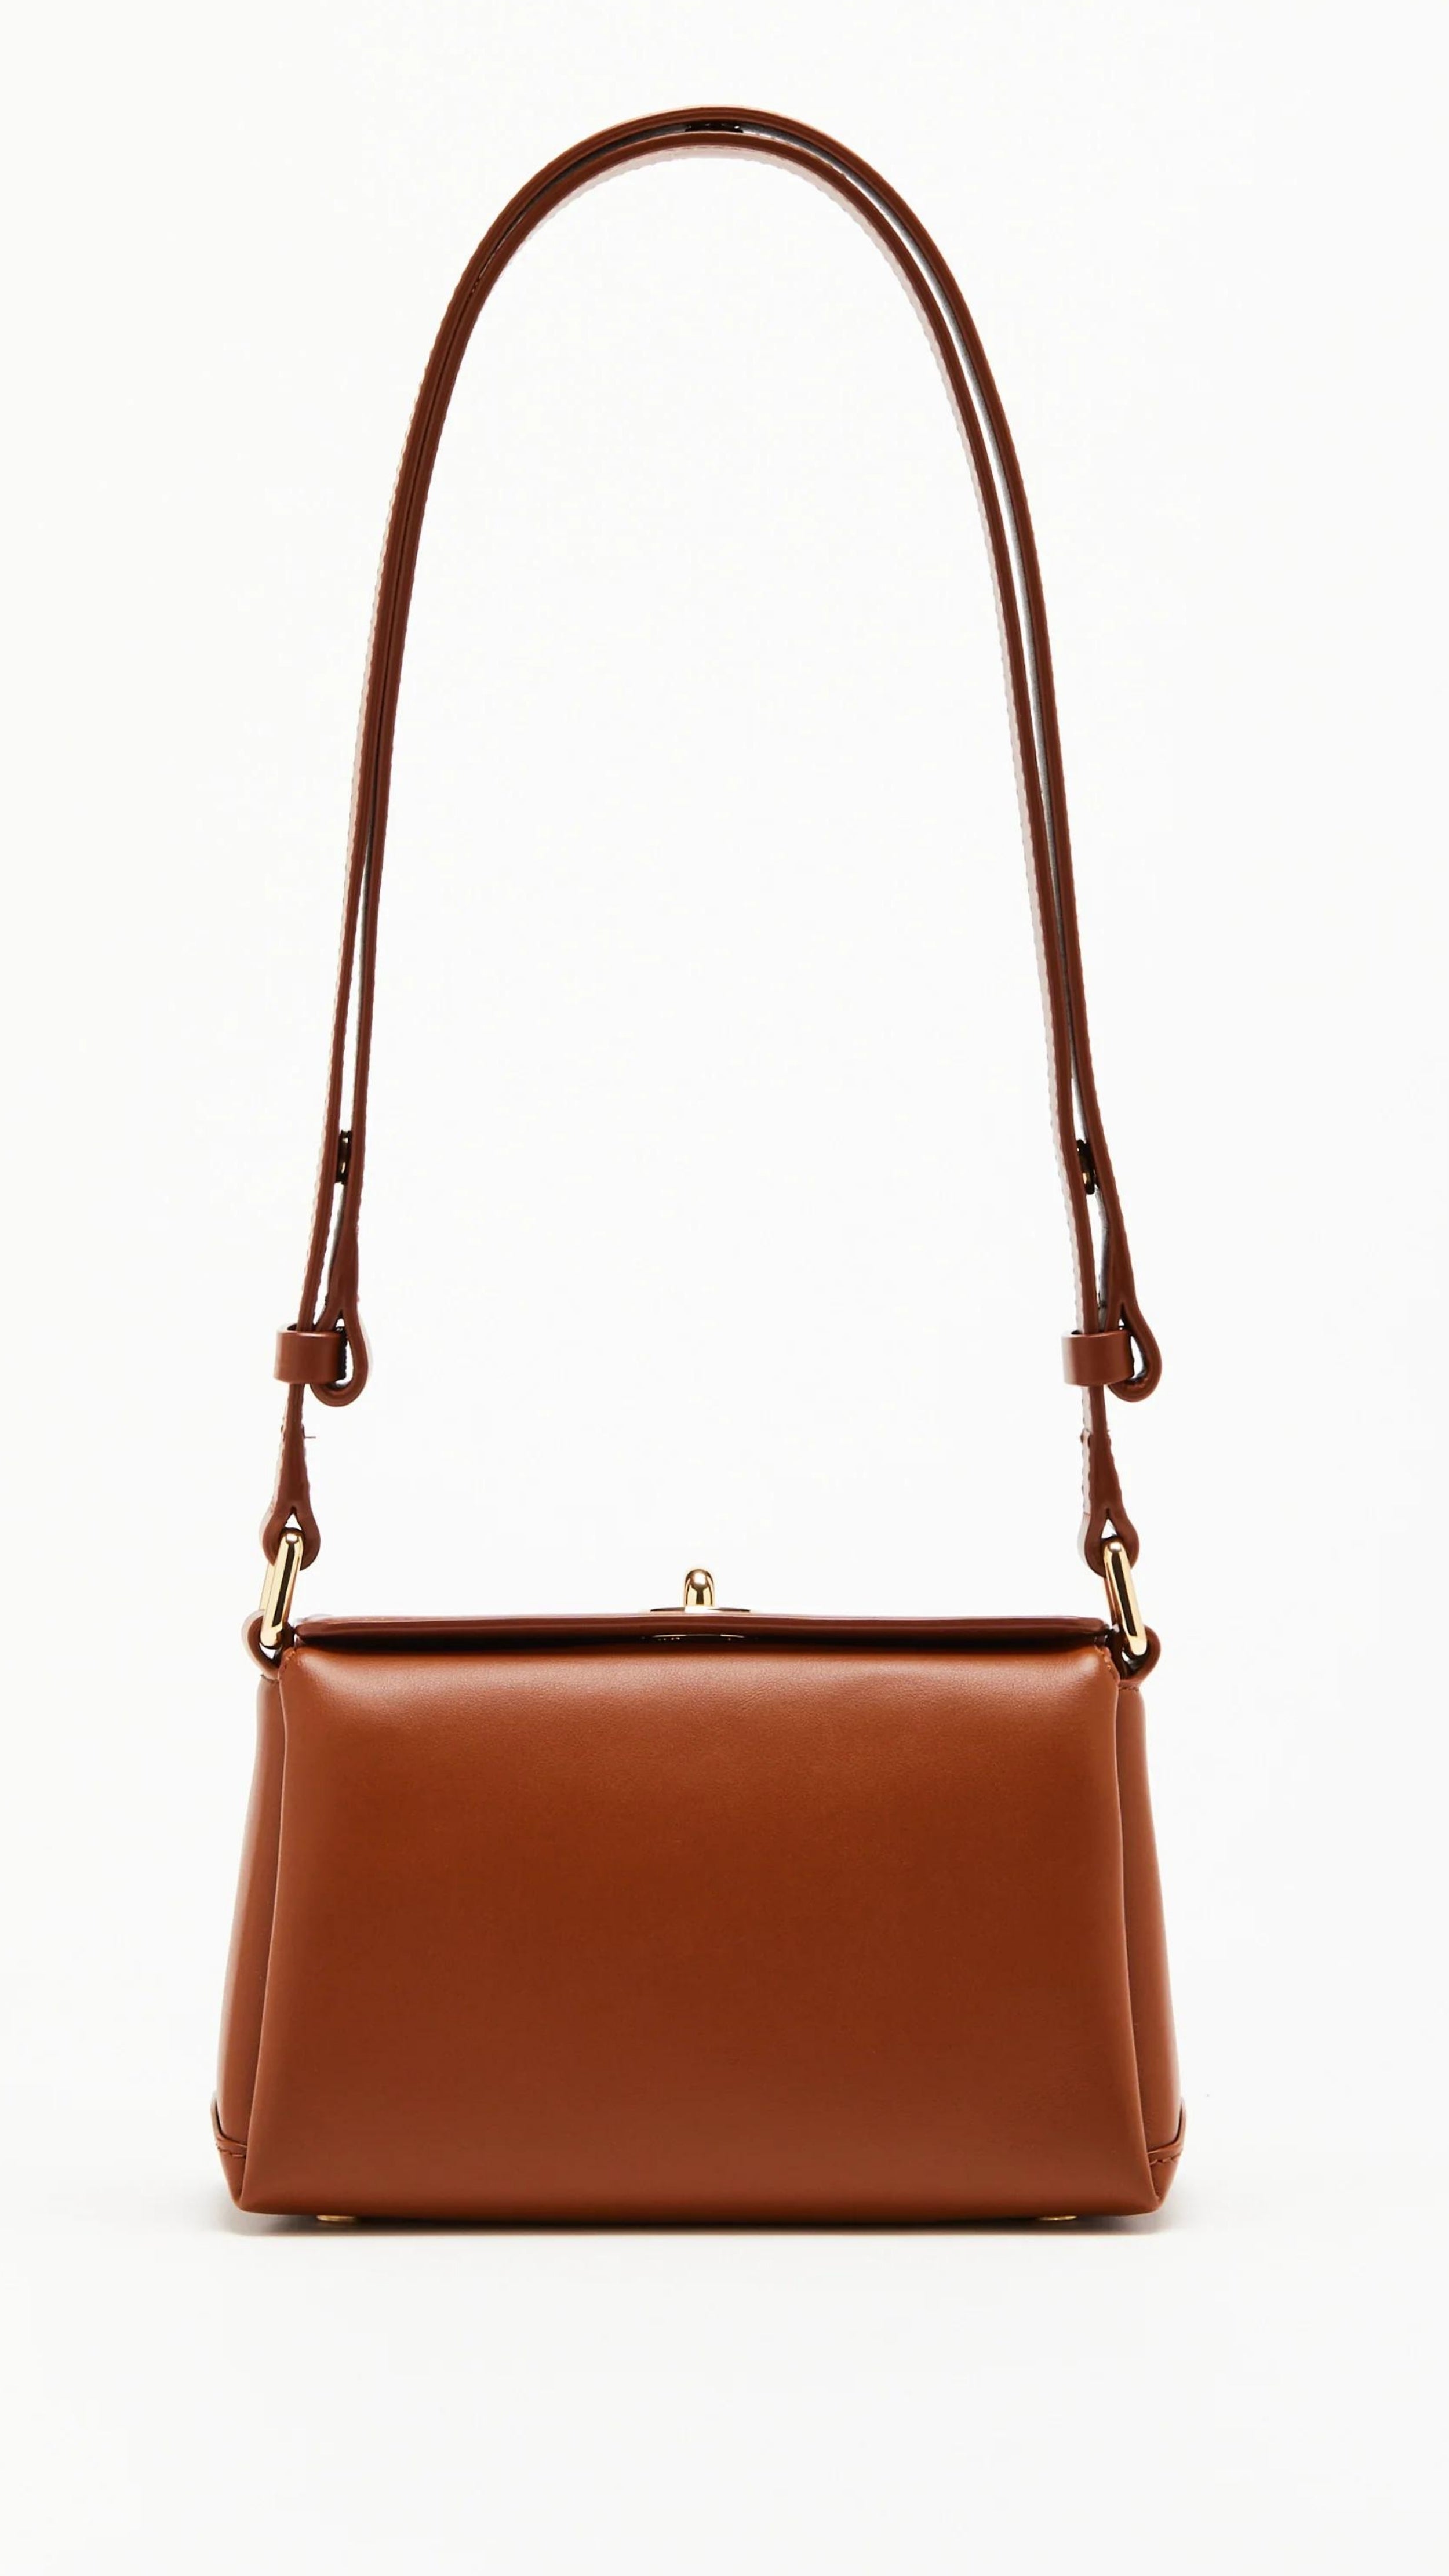 Plan C The Mini Folded Bag in Toasted Brown. Luxury handbag crafted in Italy from soft calfskin with an adjustable leather shoulder strap. This purse has a gold-toned turnstile top closure and offers three compartments, one flat zipped and one snap buttoned pocket.  Photo shown from the front view with the adjustable shoulder strap.